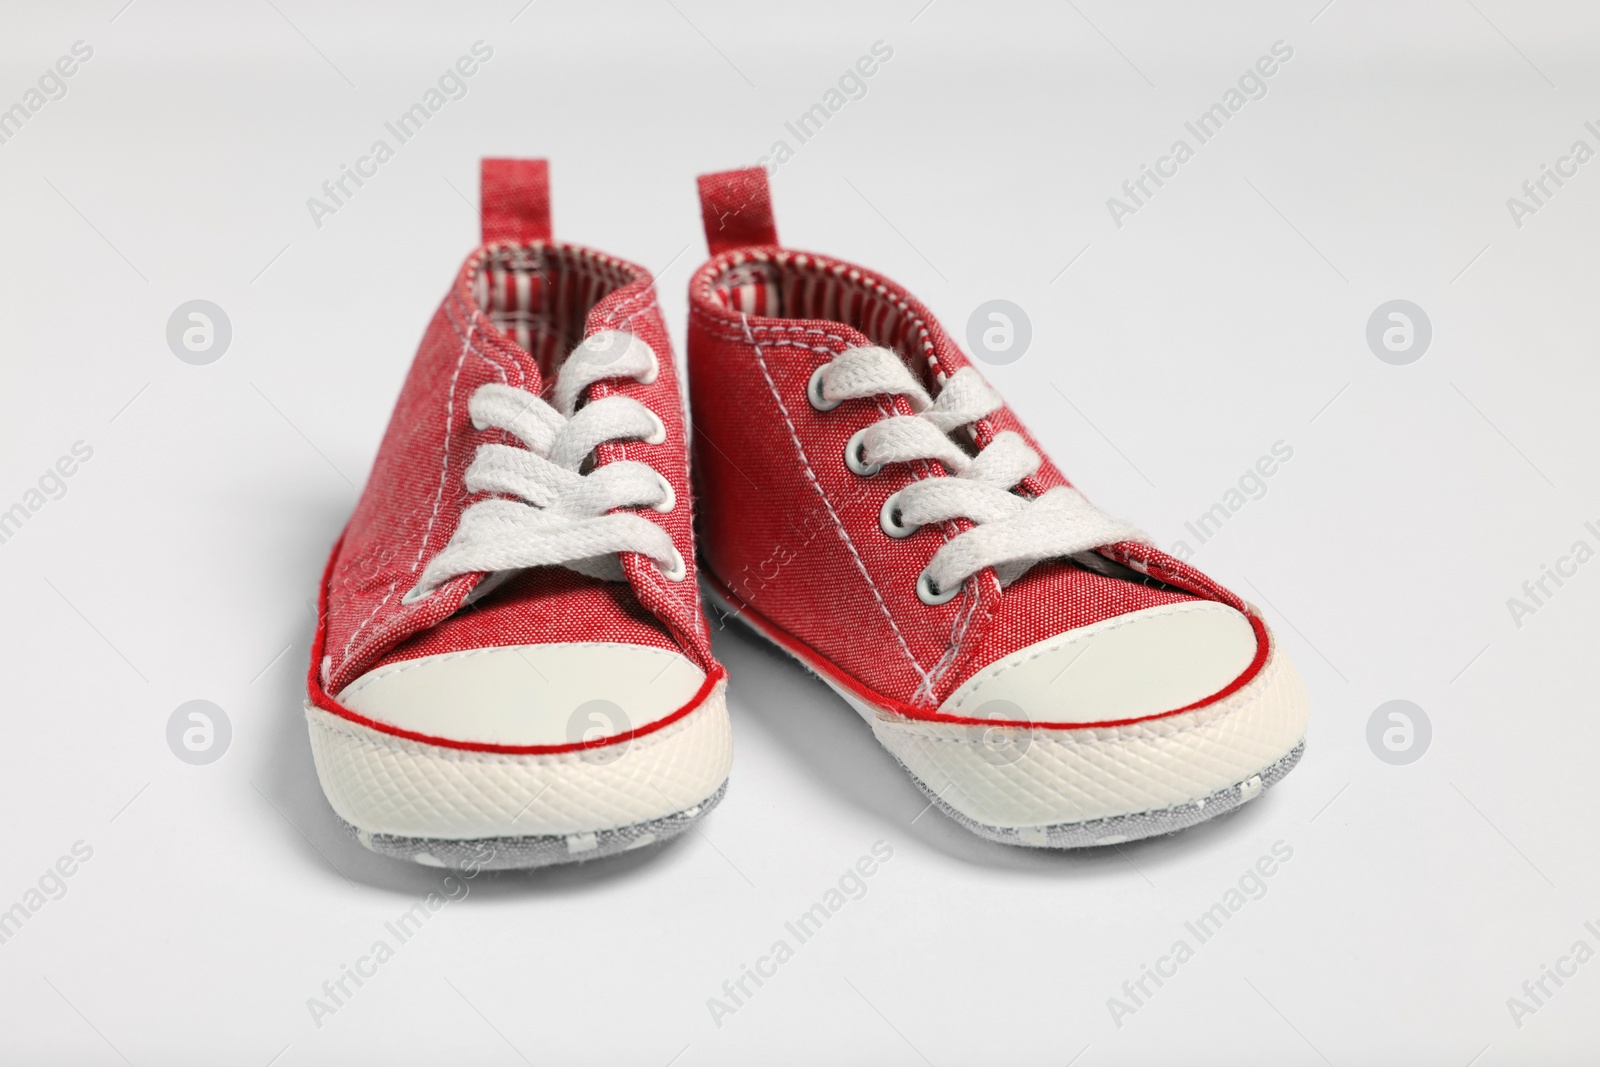 Photo of Pair of cute baby shoes on white background